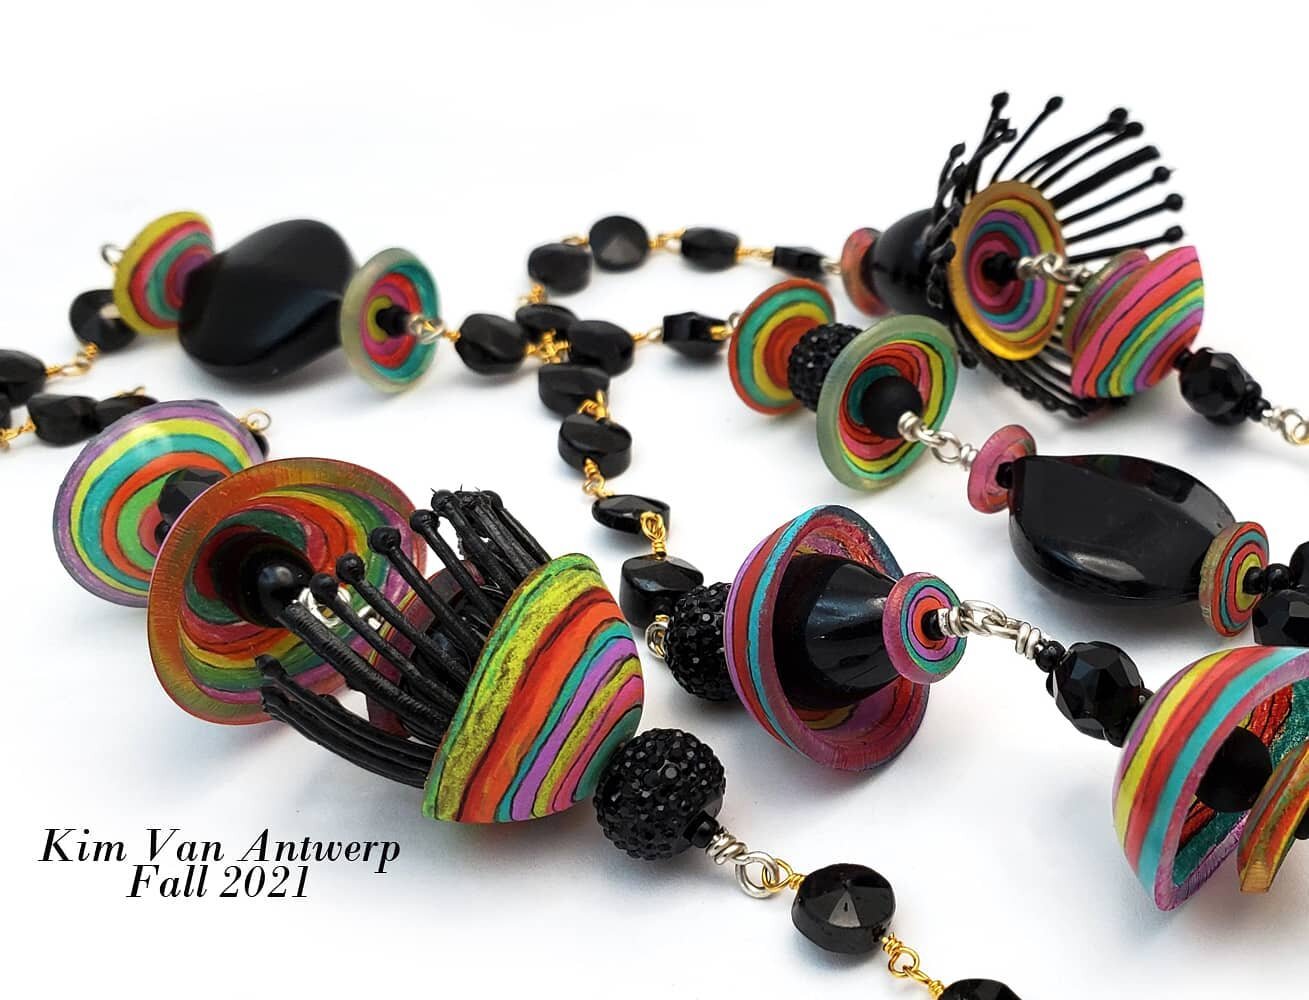 Color Wheels necklace class, in Tucson this September. Links to register coming soon-follow me for the latest updates.
#juliehaymaker #Shrinkets #jewelrymaking #jewelryclass #jewelrykit #diyjewelrymaking #colorfuljewelry